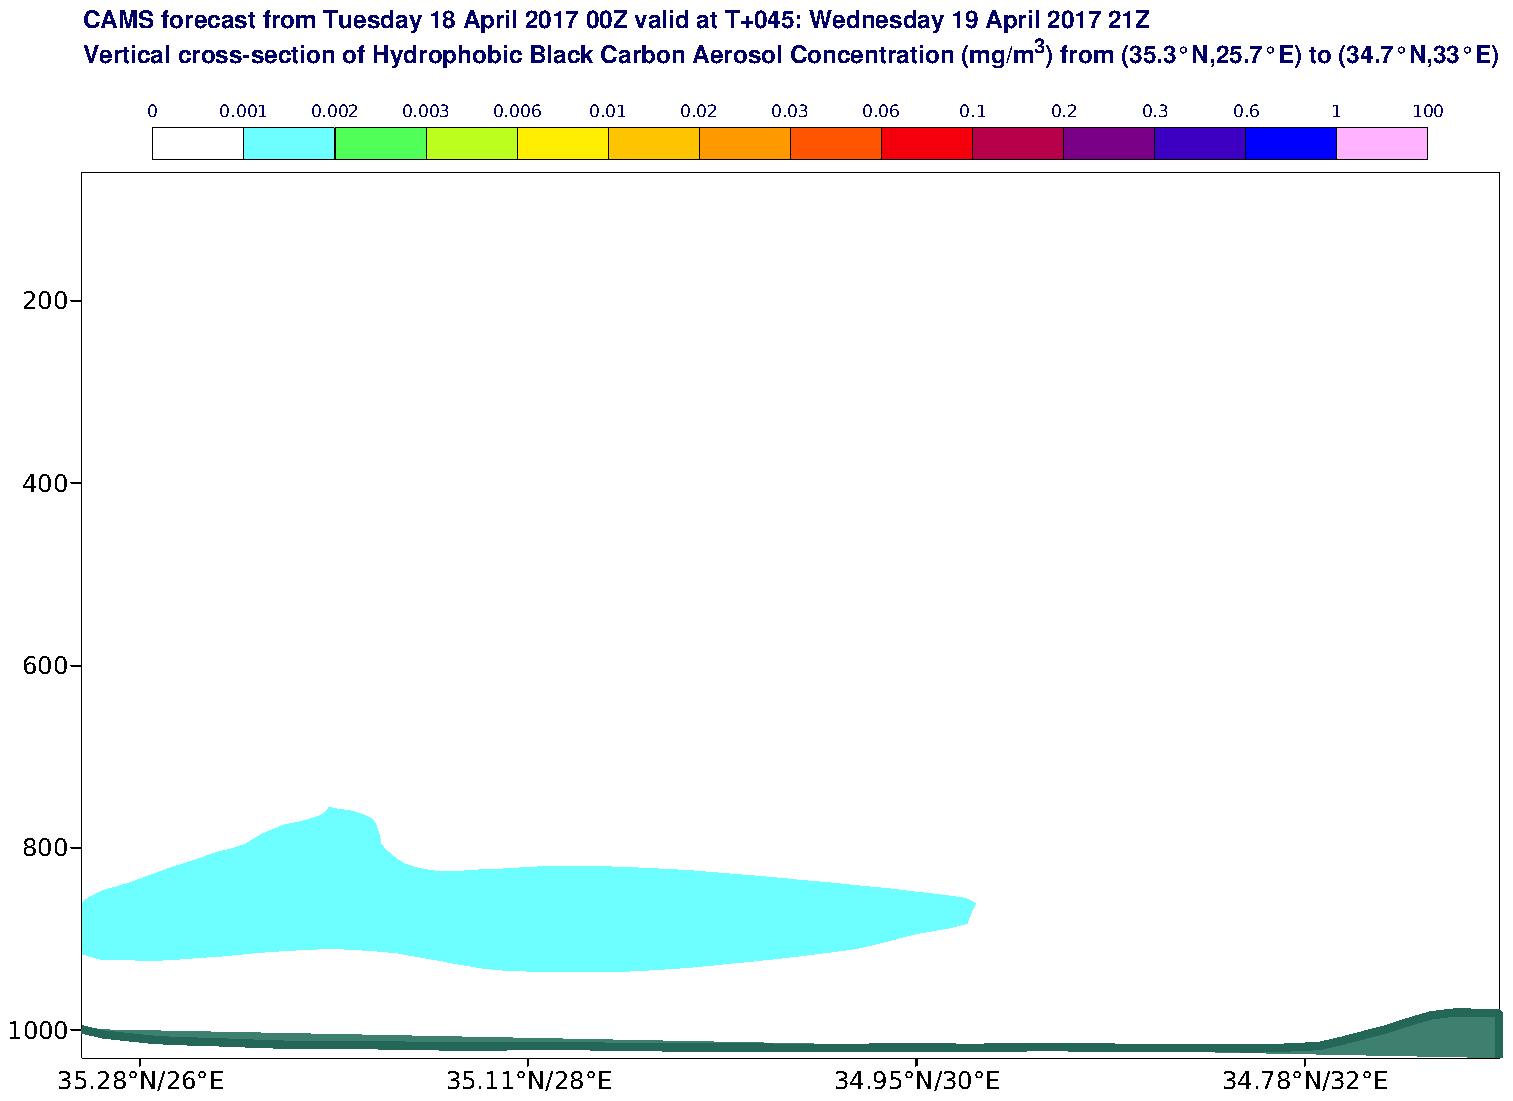 Vertical cross-section of Hydrophobic Black Carbon Aerosol Concentration (mg/m3) valid at T45 - 2017-04-19 21:00